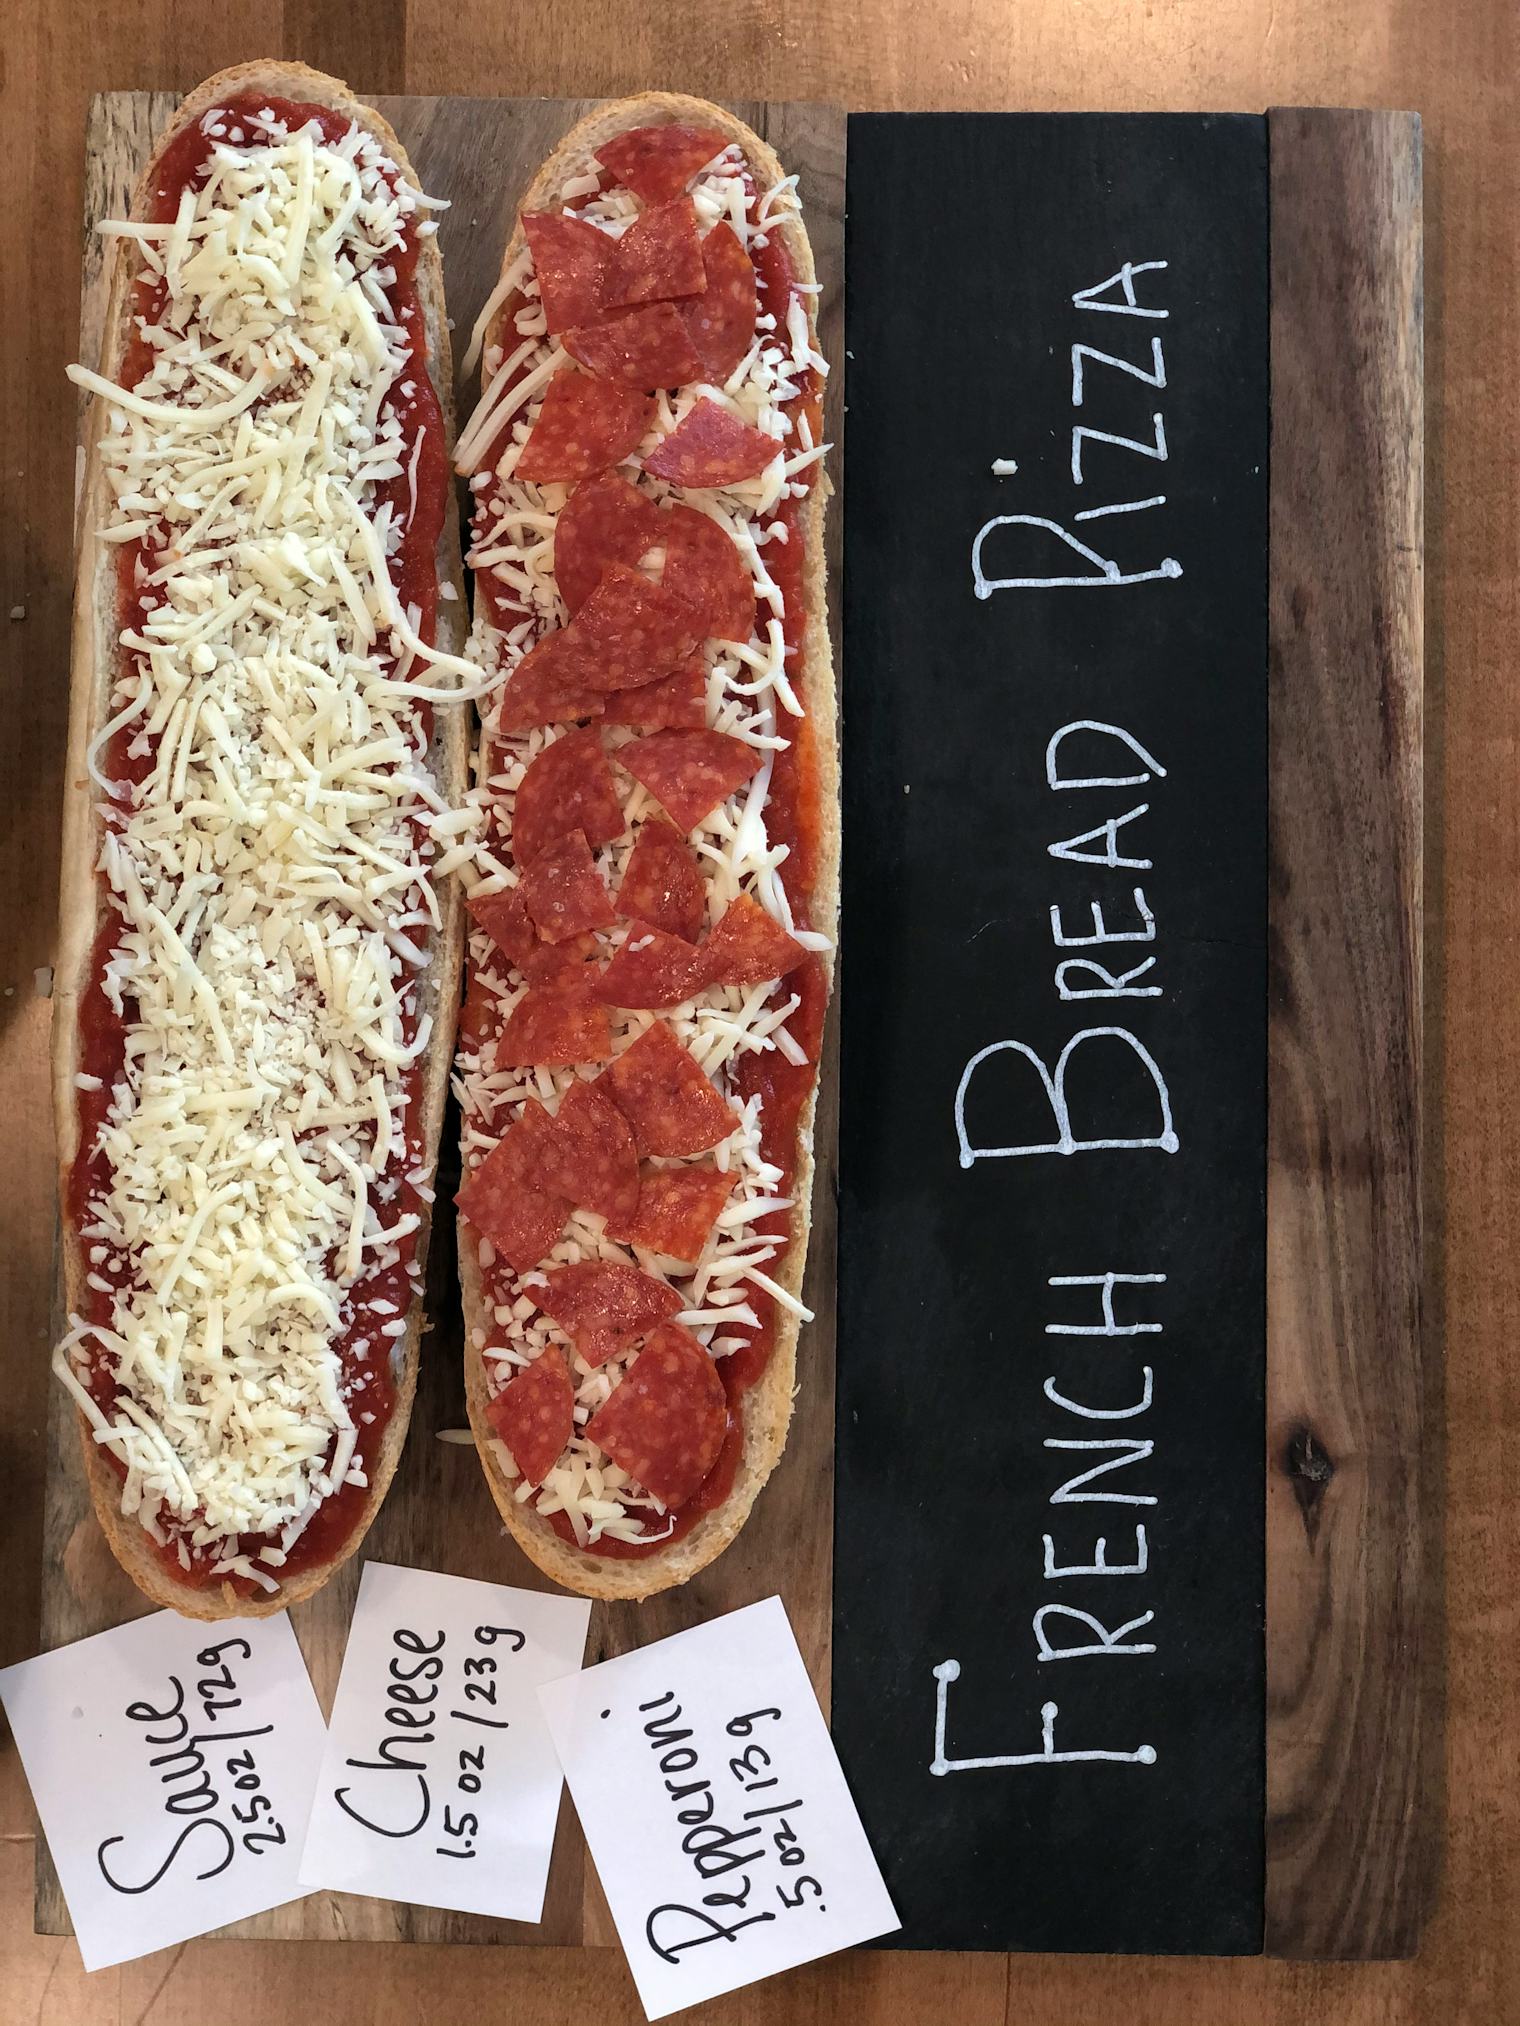 Stouffers French Bread Pizza Recipe Is Here For All You At Home Bakers 6460